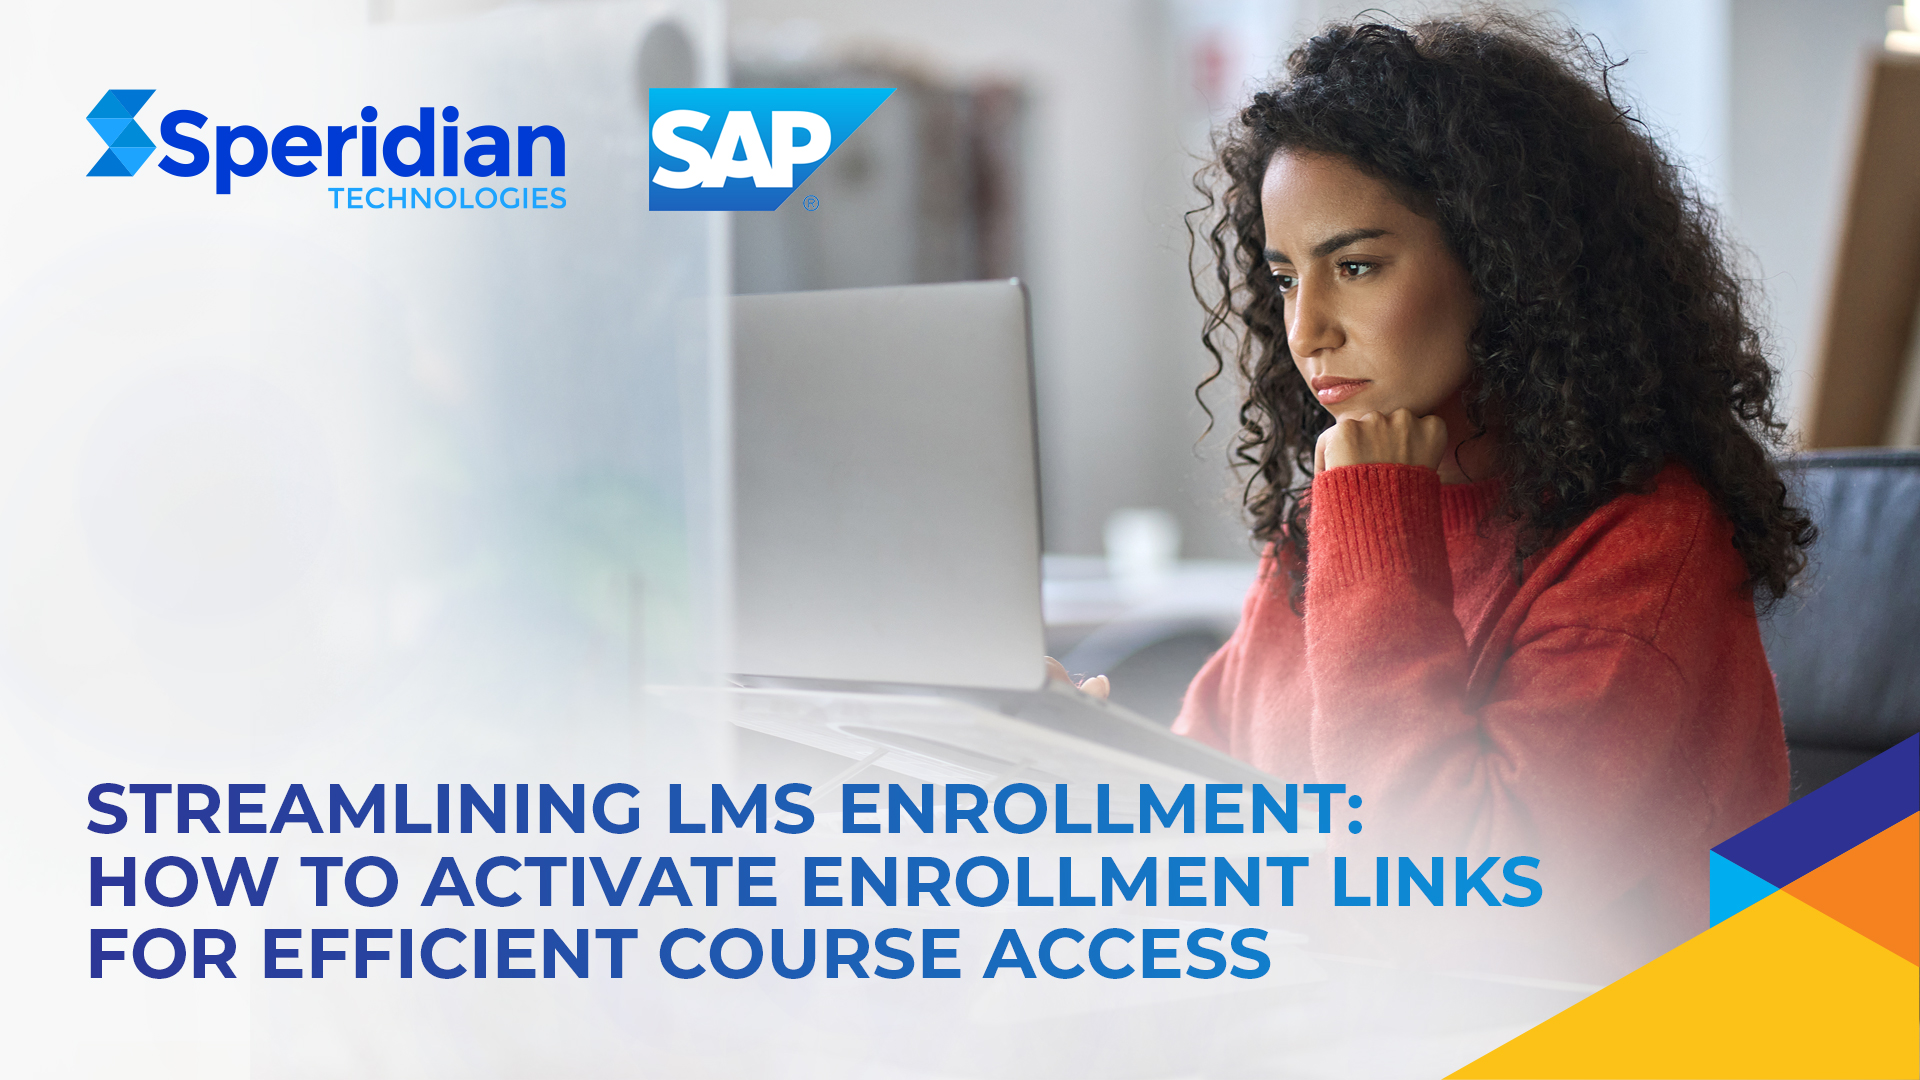 Streamlining LMS Enrollment: How to Activate Enrollment Links for Efficient Course Access